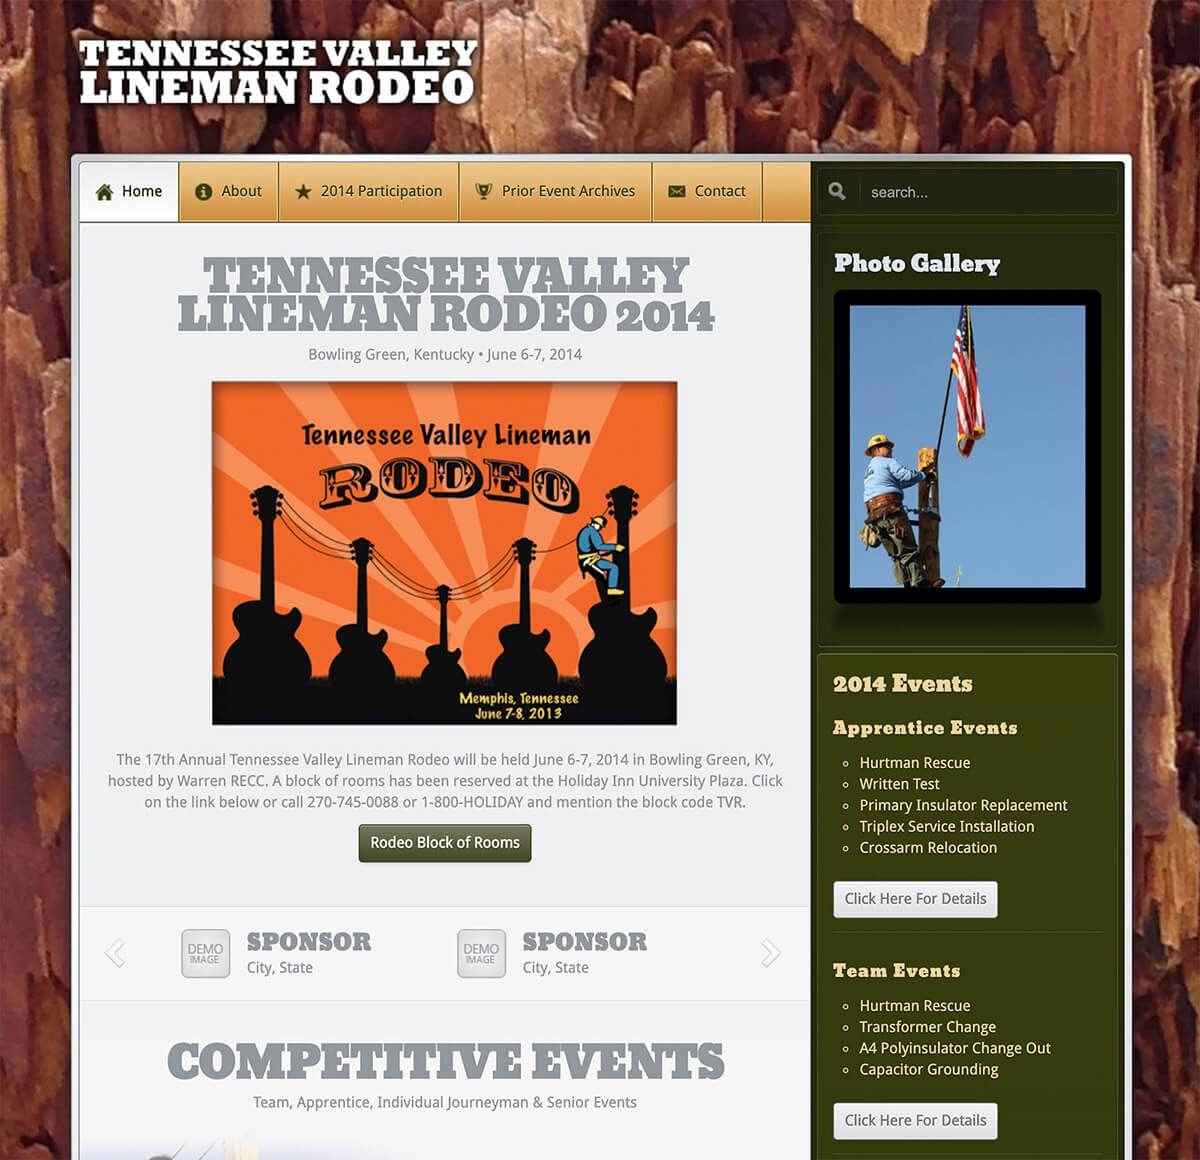 Tennessee Valley Lineman Rodeo web design by EyeSite Creations